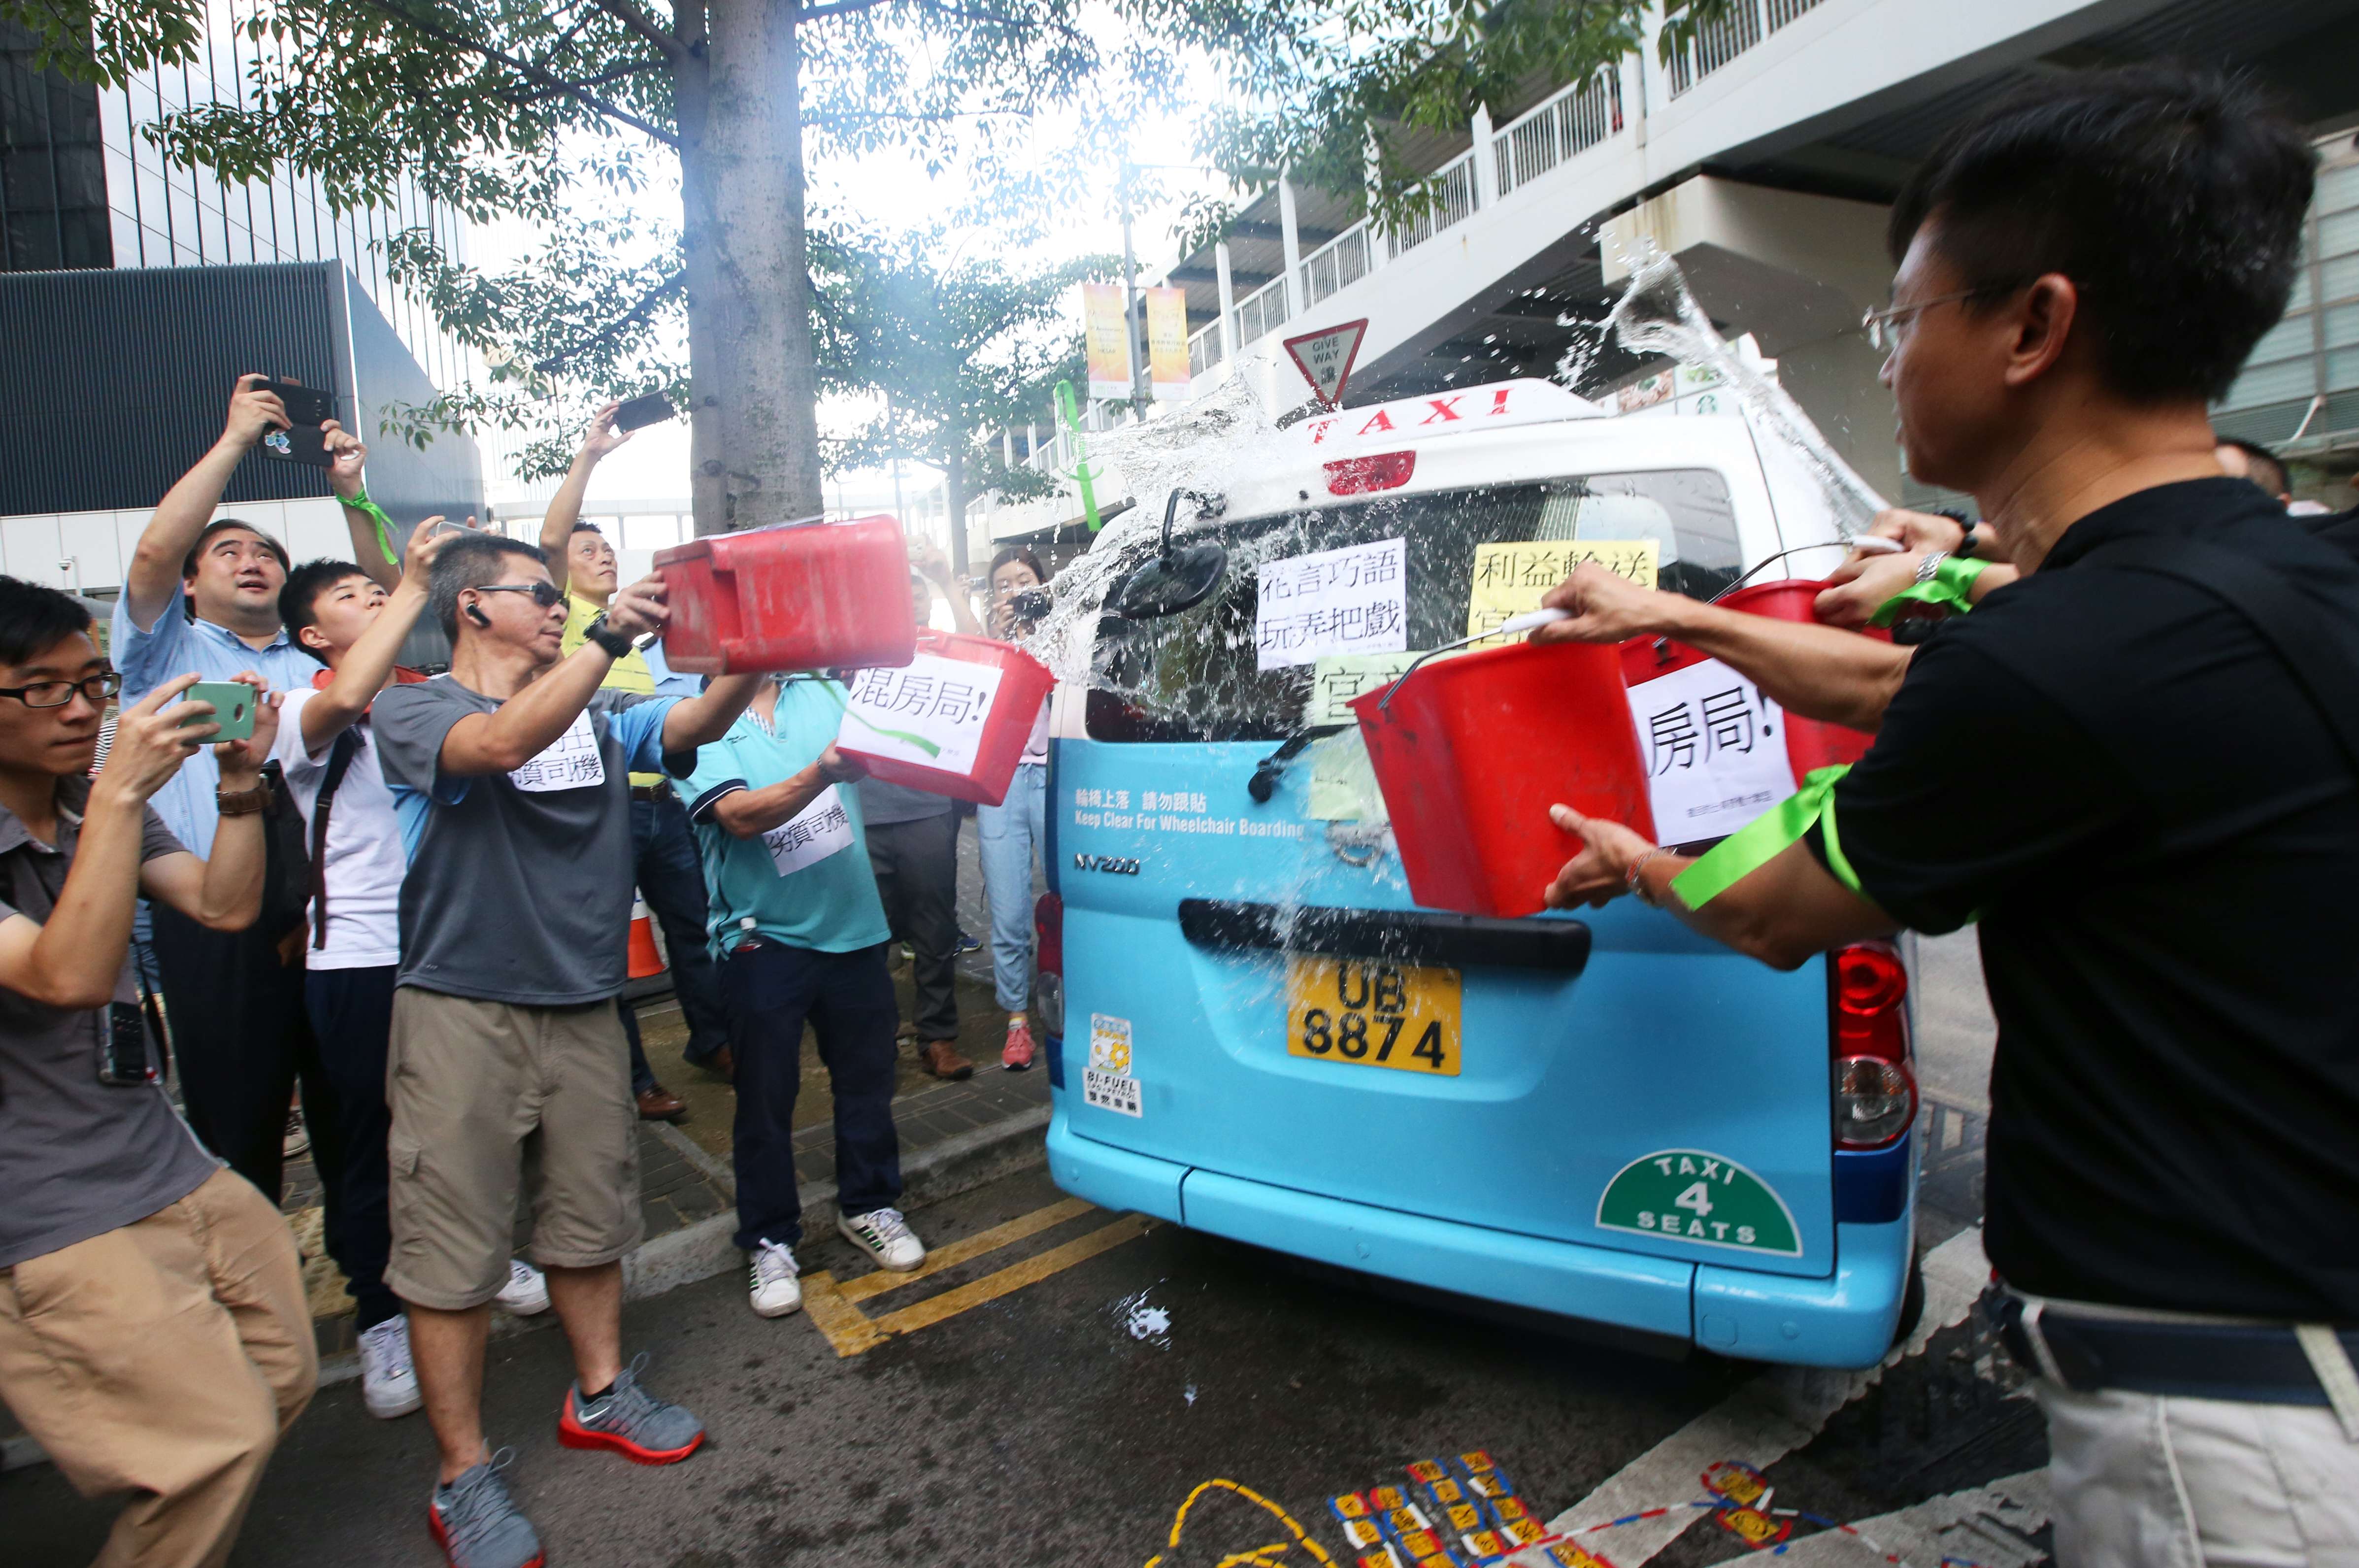 Protesters at Tamar pouring water over a model of taxi that would be used in the government’s plan. Photo: David Wong